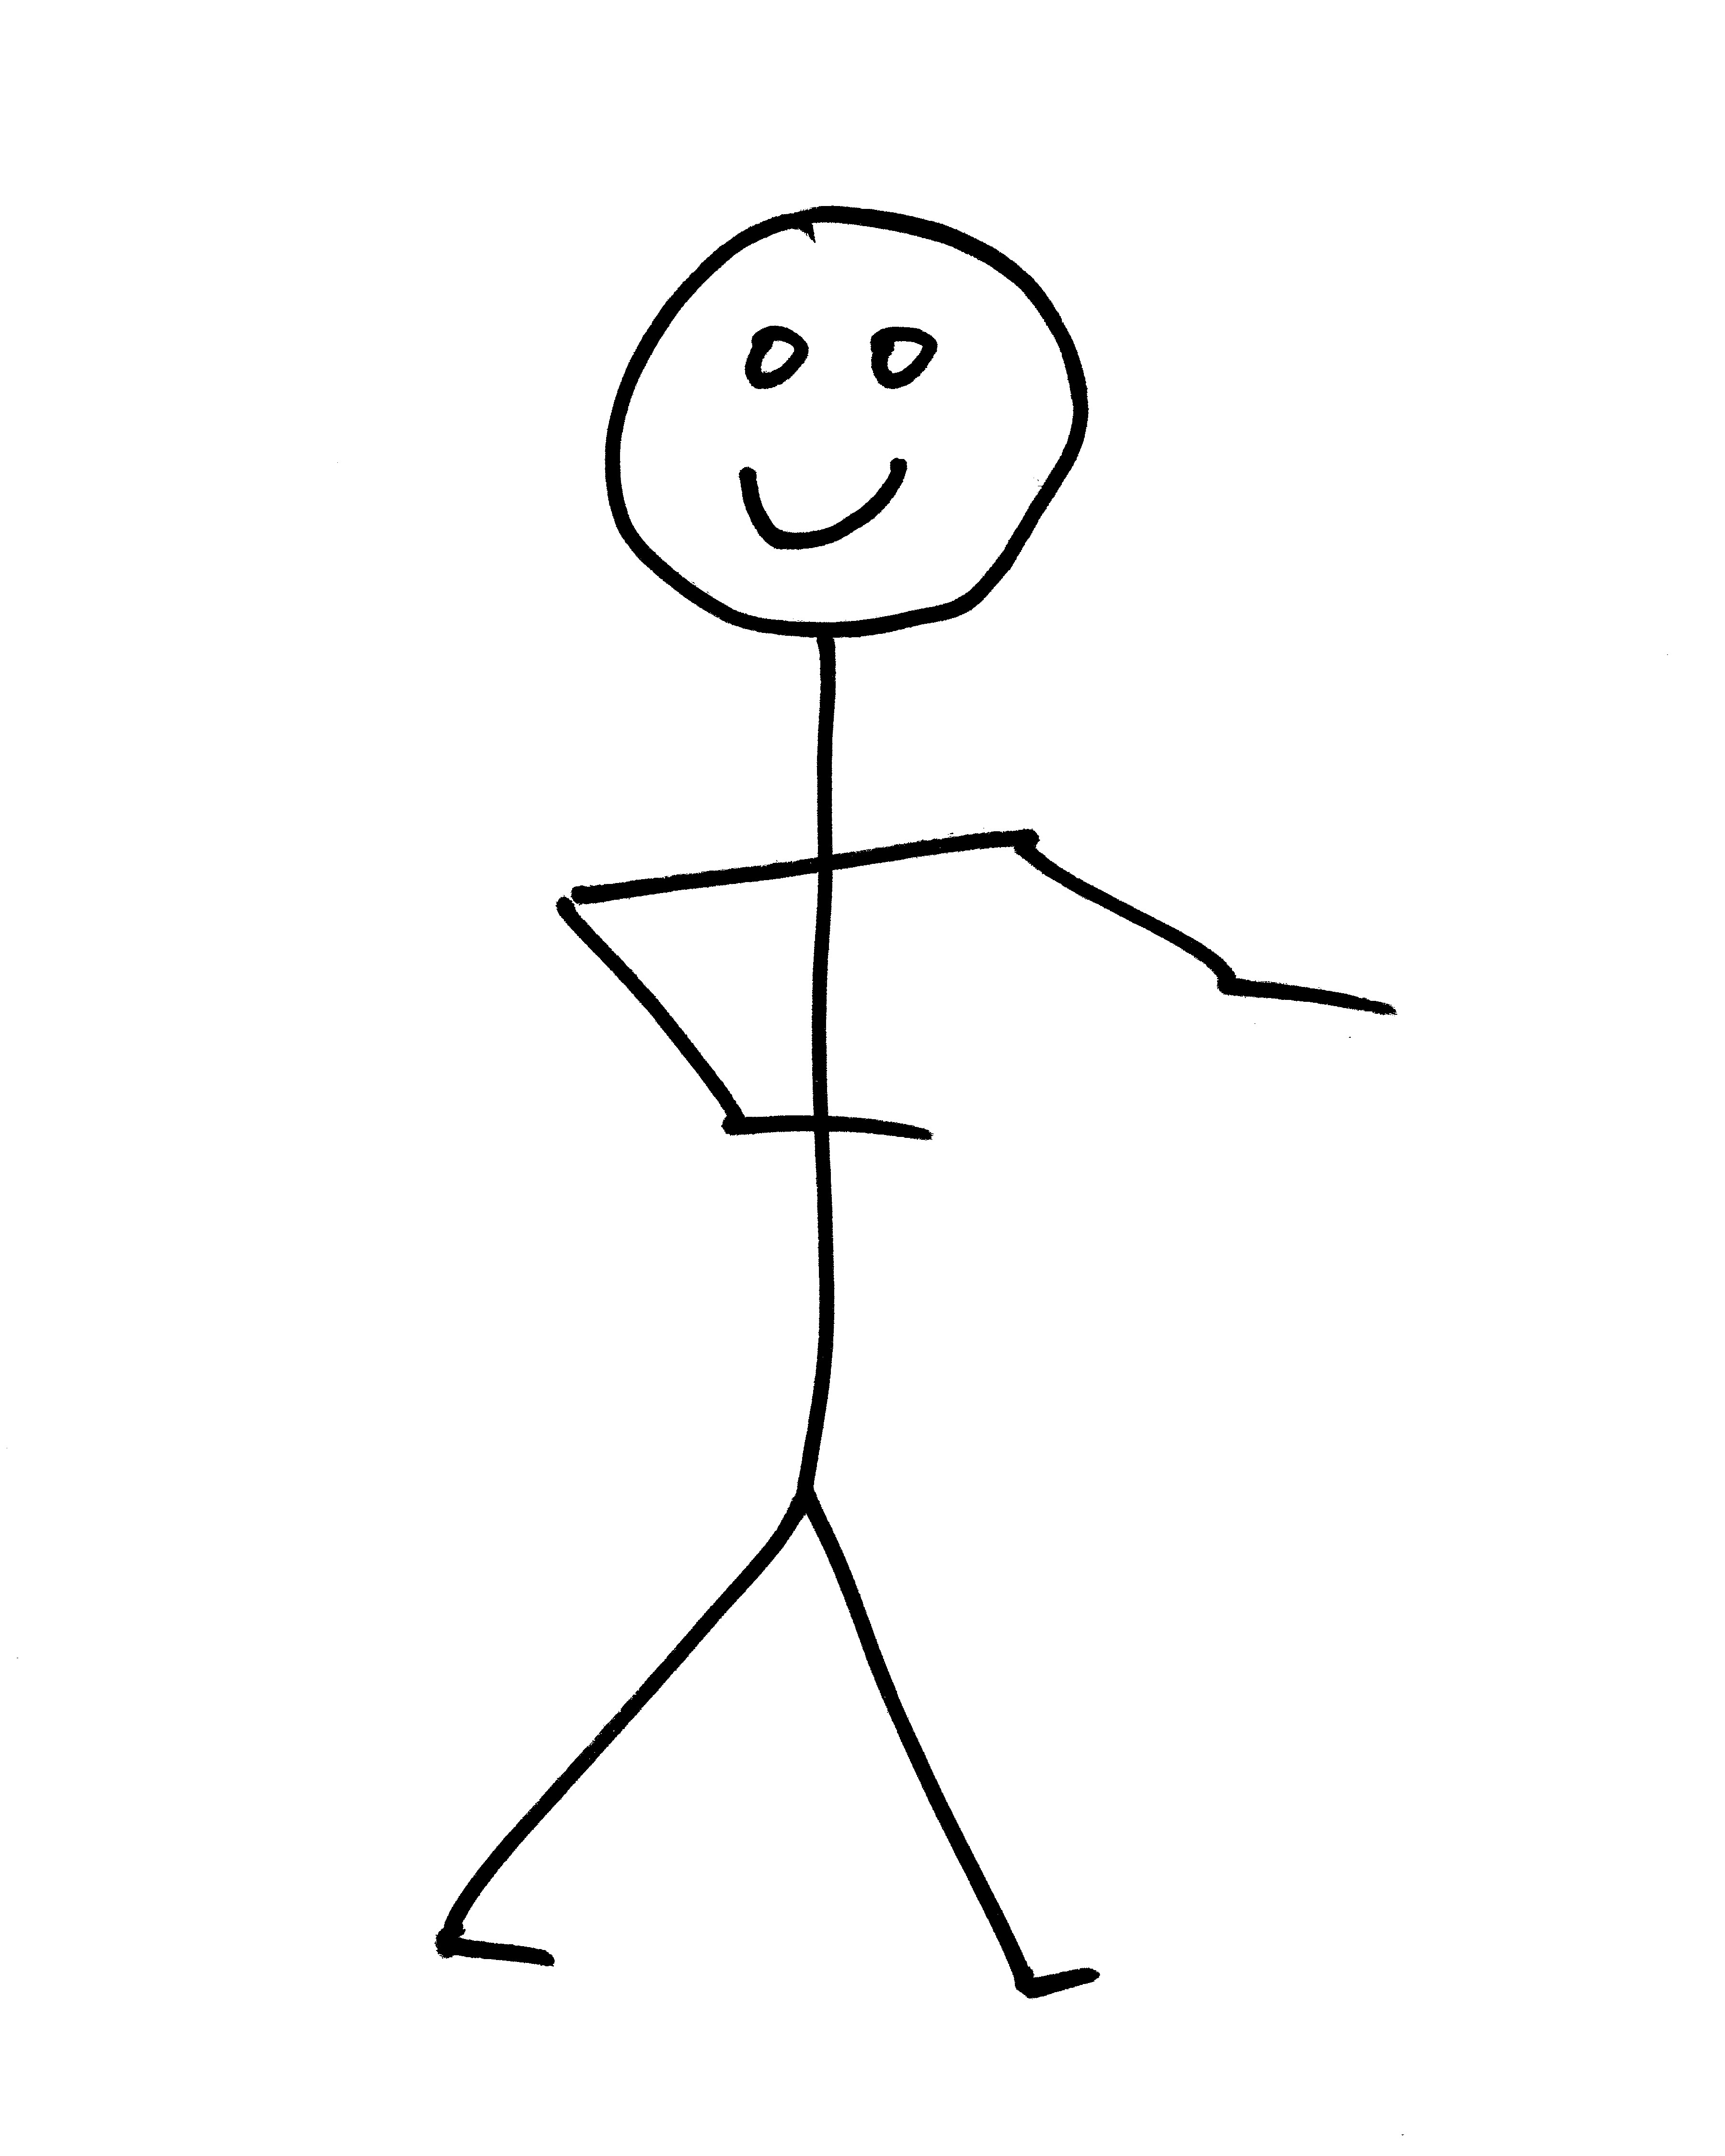 Smiling Stick Figure Person Picture | Free Photograph | Photos ...